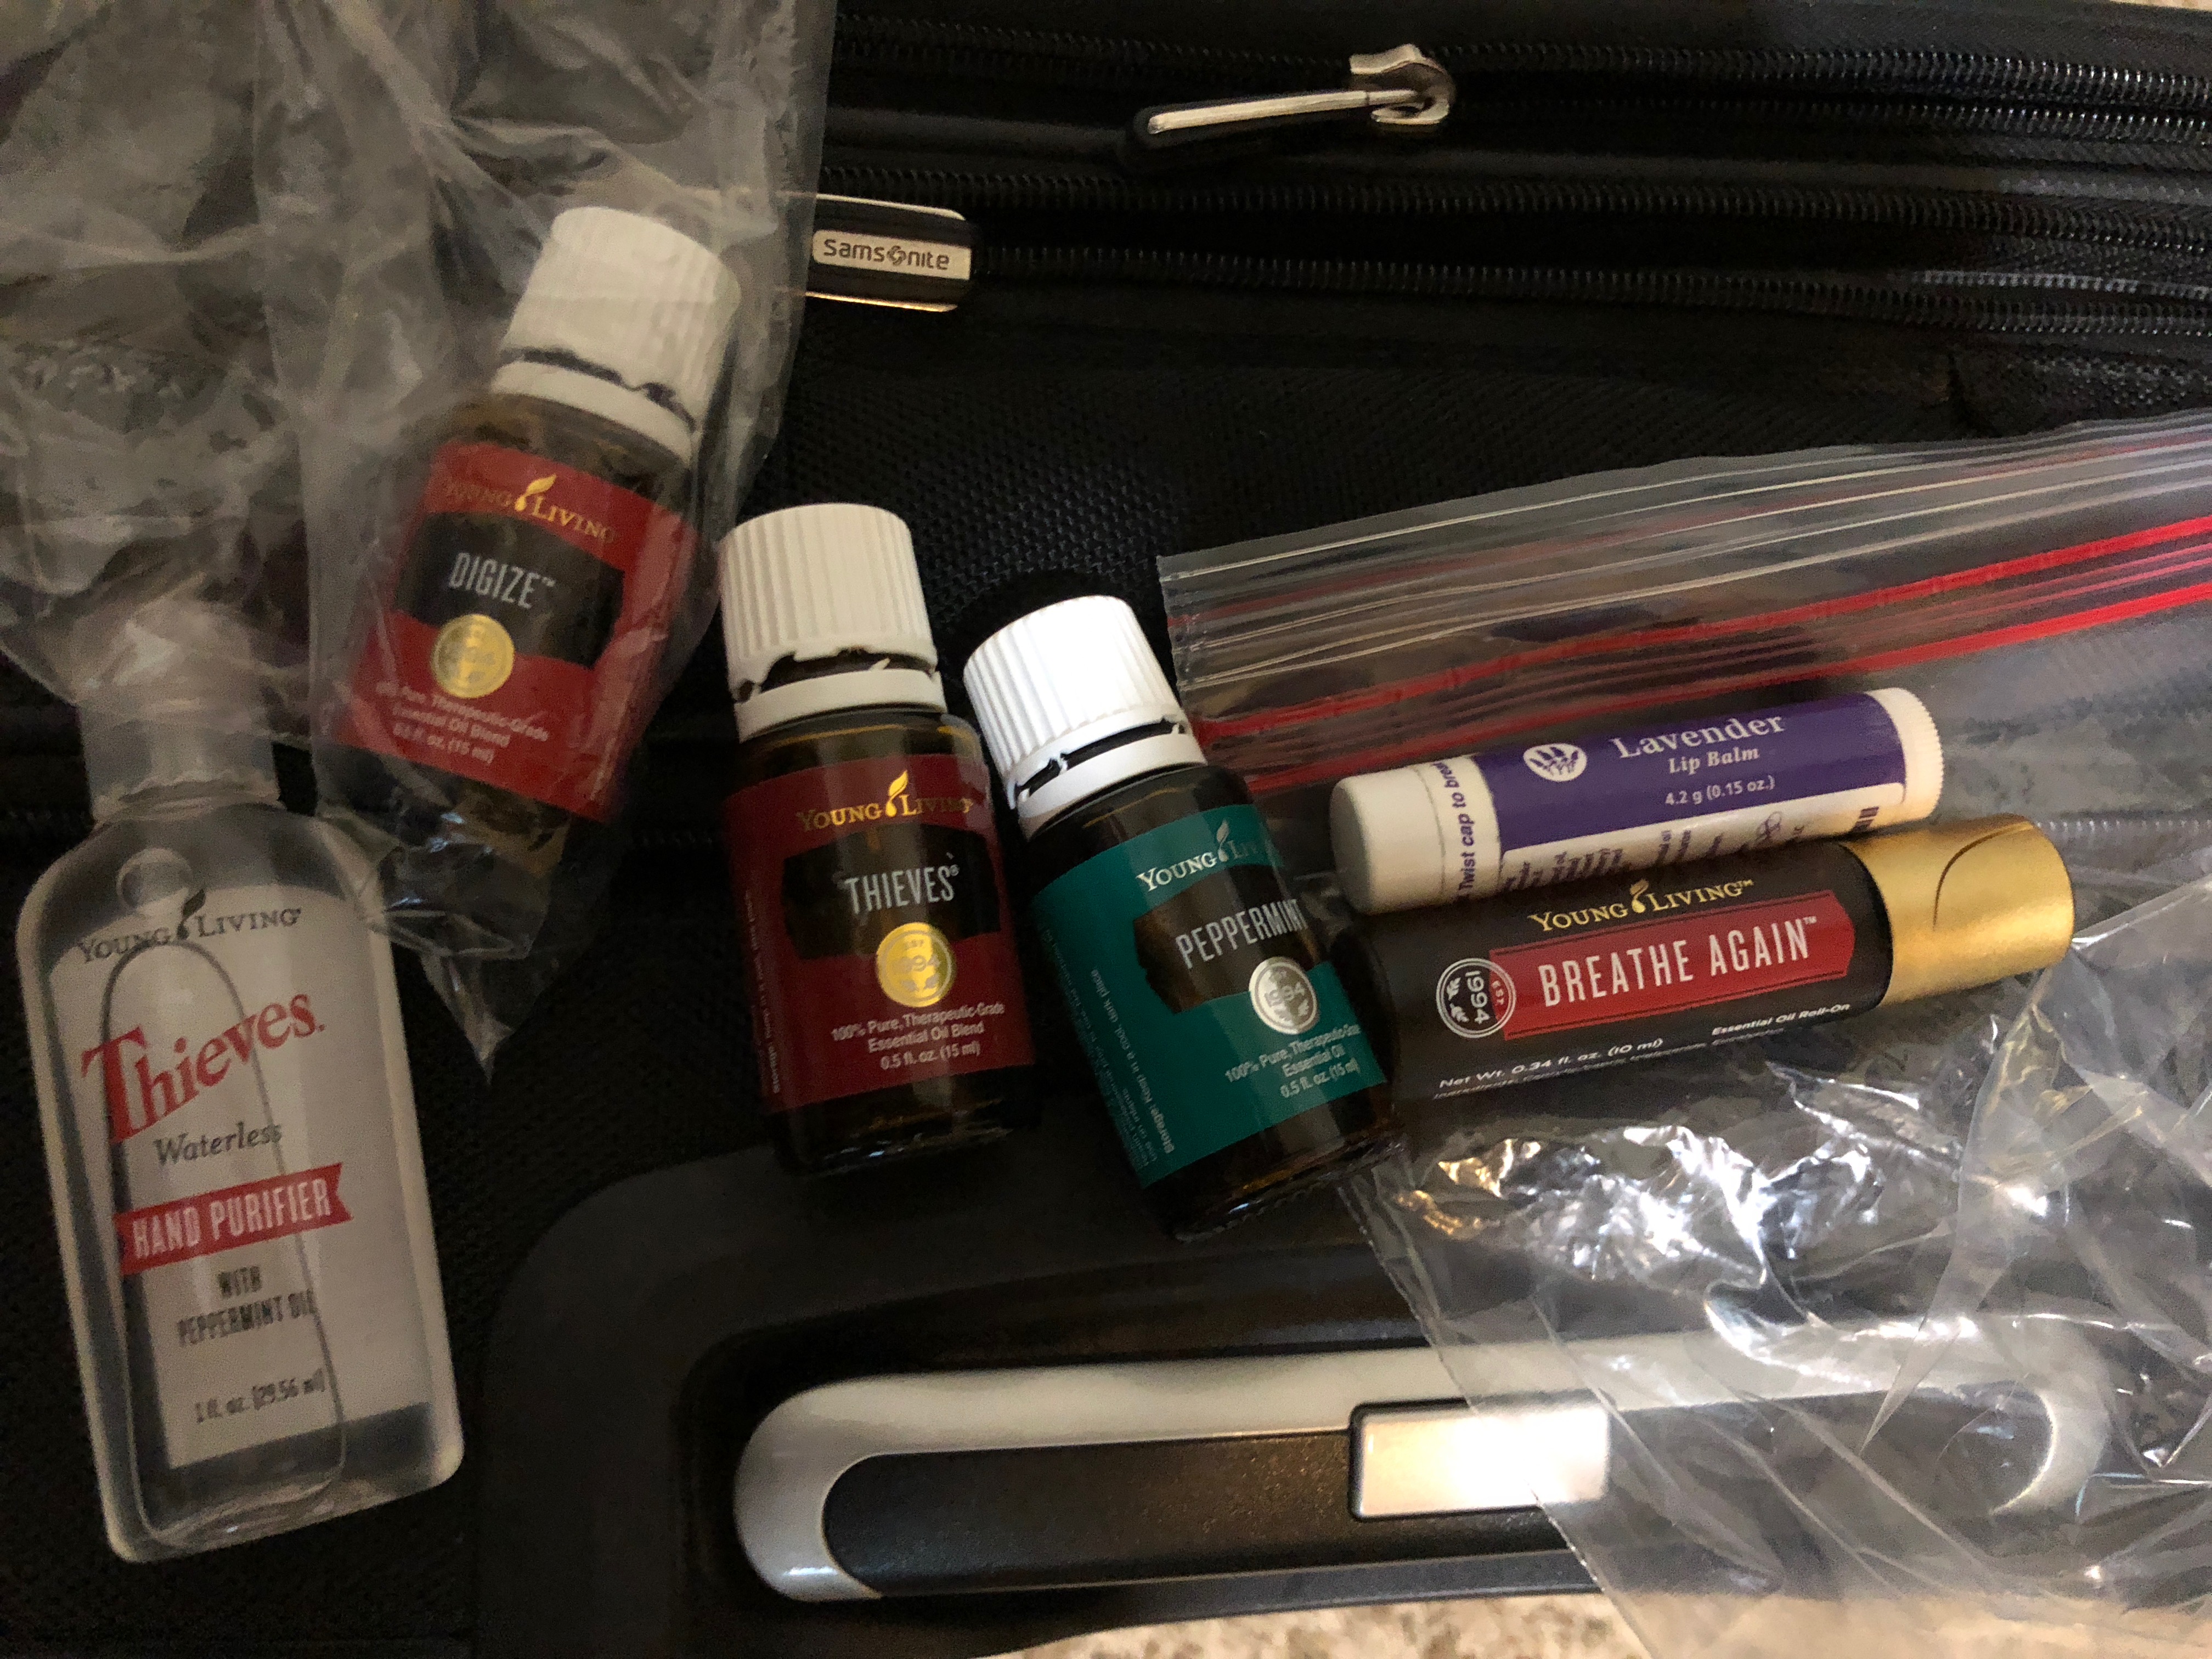 My Essential Oils for travel: Thieves hand purifier, Digize, Thieves, Peppermint, Breathe Again. Travel oils.